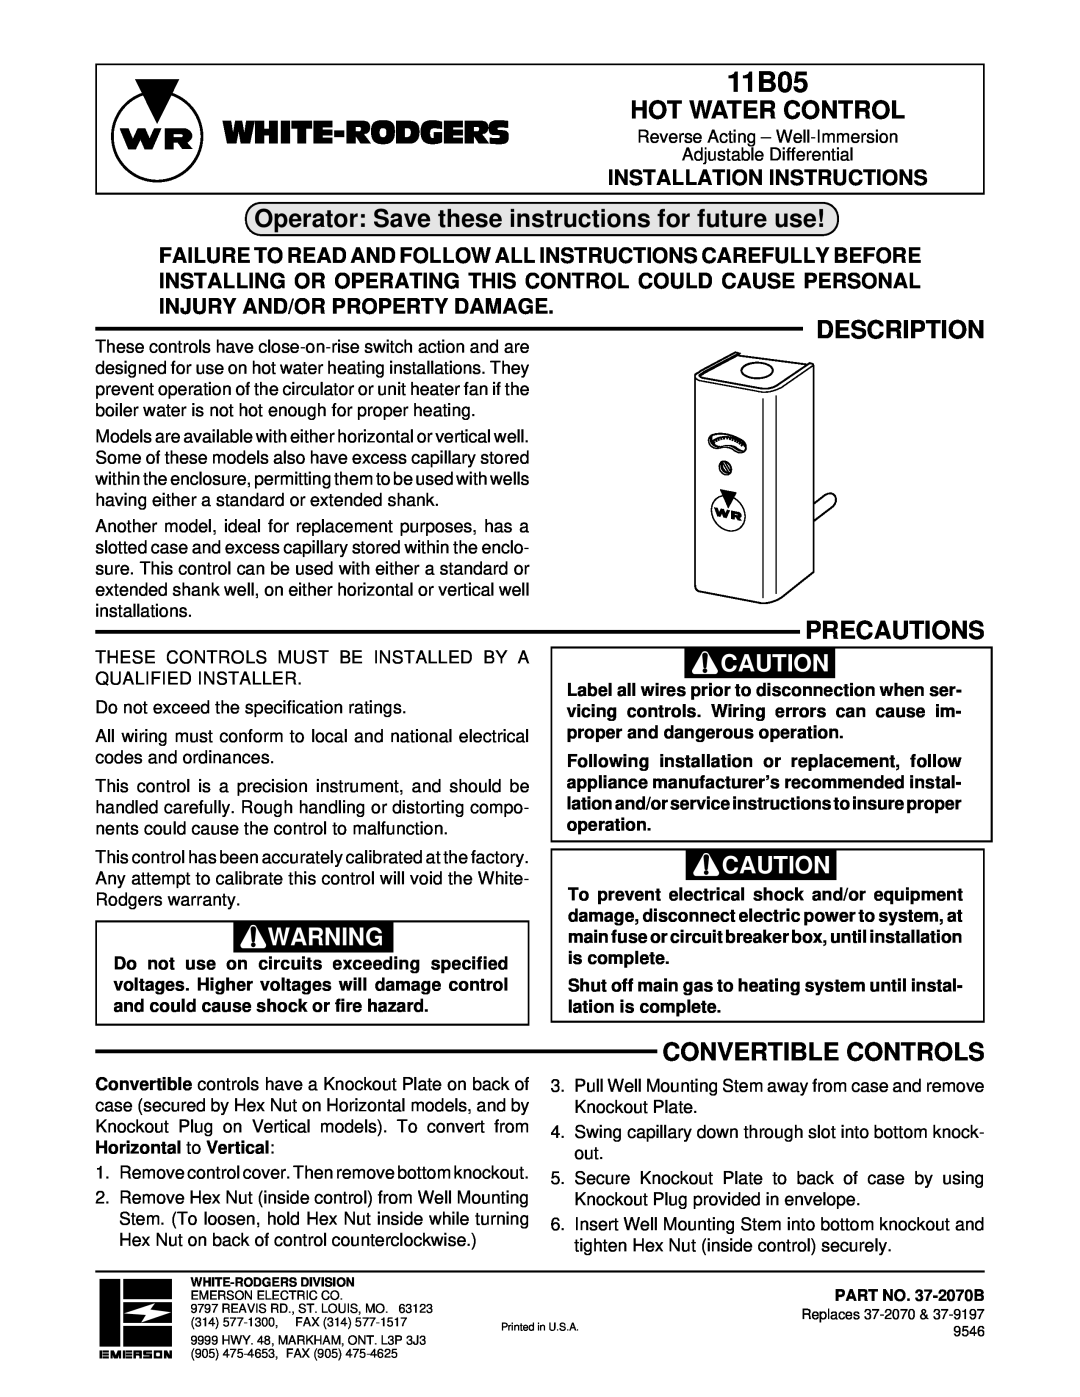 White Rodgers 11B05 installation instructions White-Rodgers, Hot Water Control, Description, Precautions 